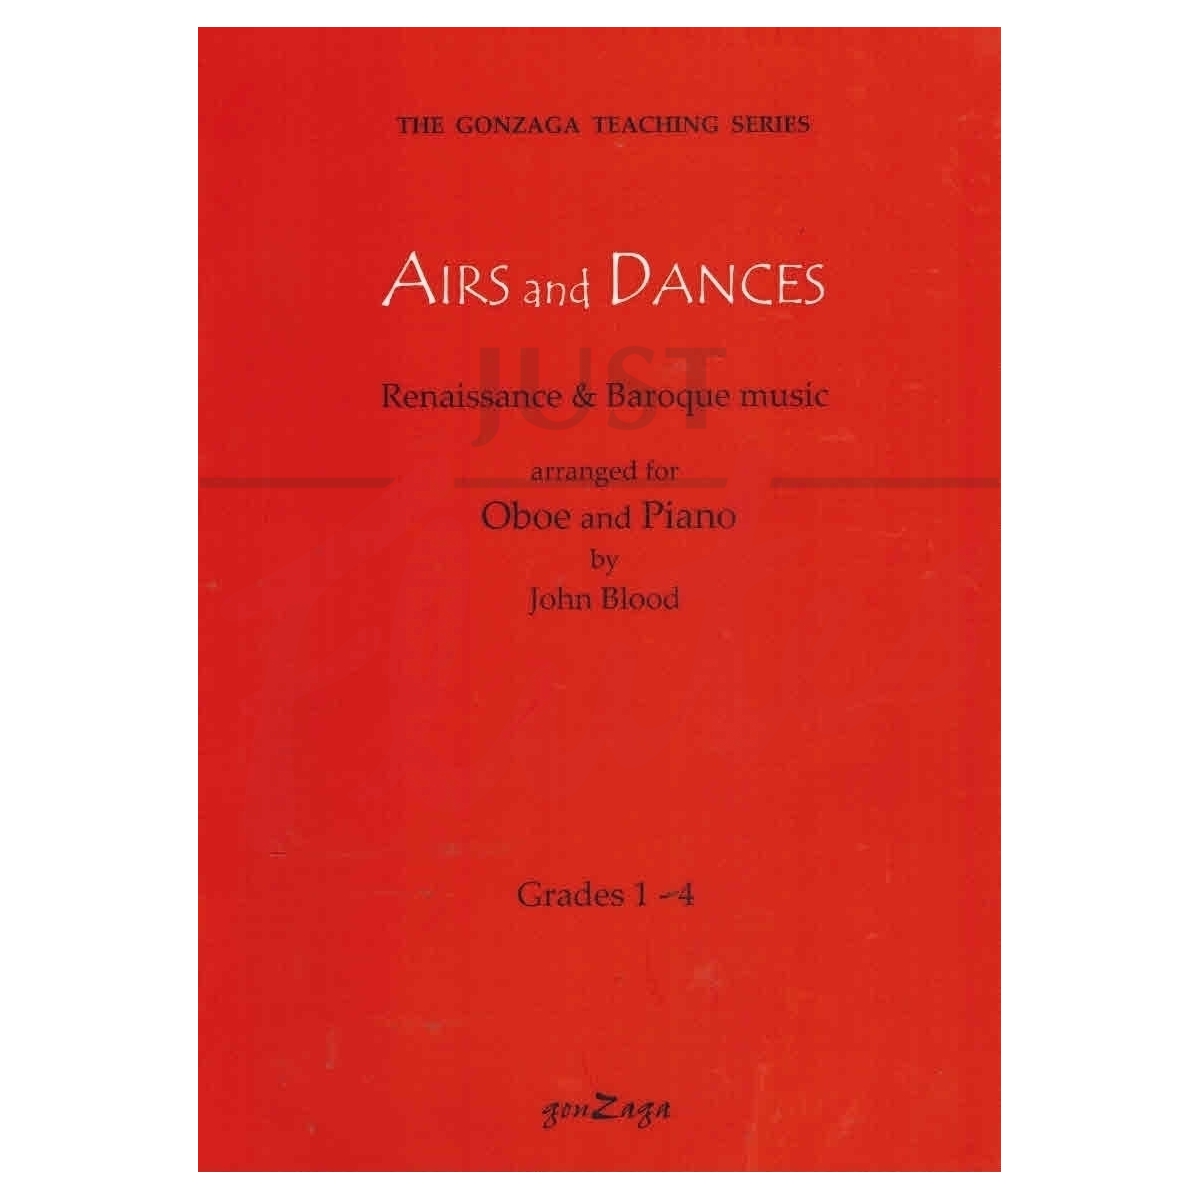 Airs and Dances: Renaissance &amp; Baroque Music for Oboe and Piano